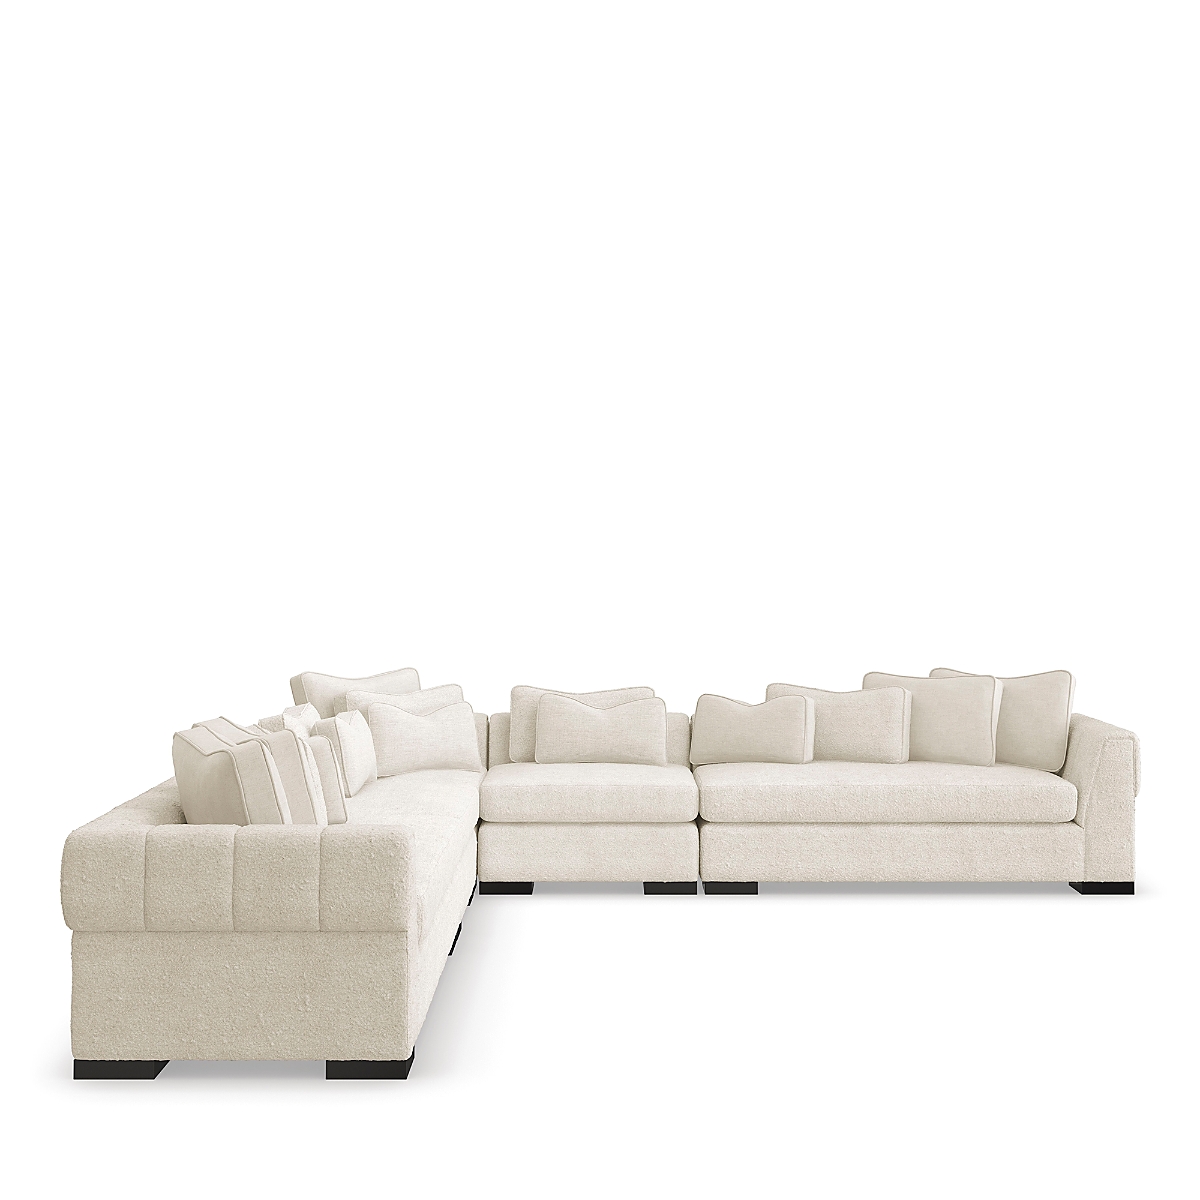 Bloomingdales Couch and Ottoman Price Mistake? $9.96